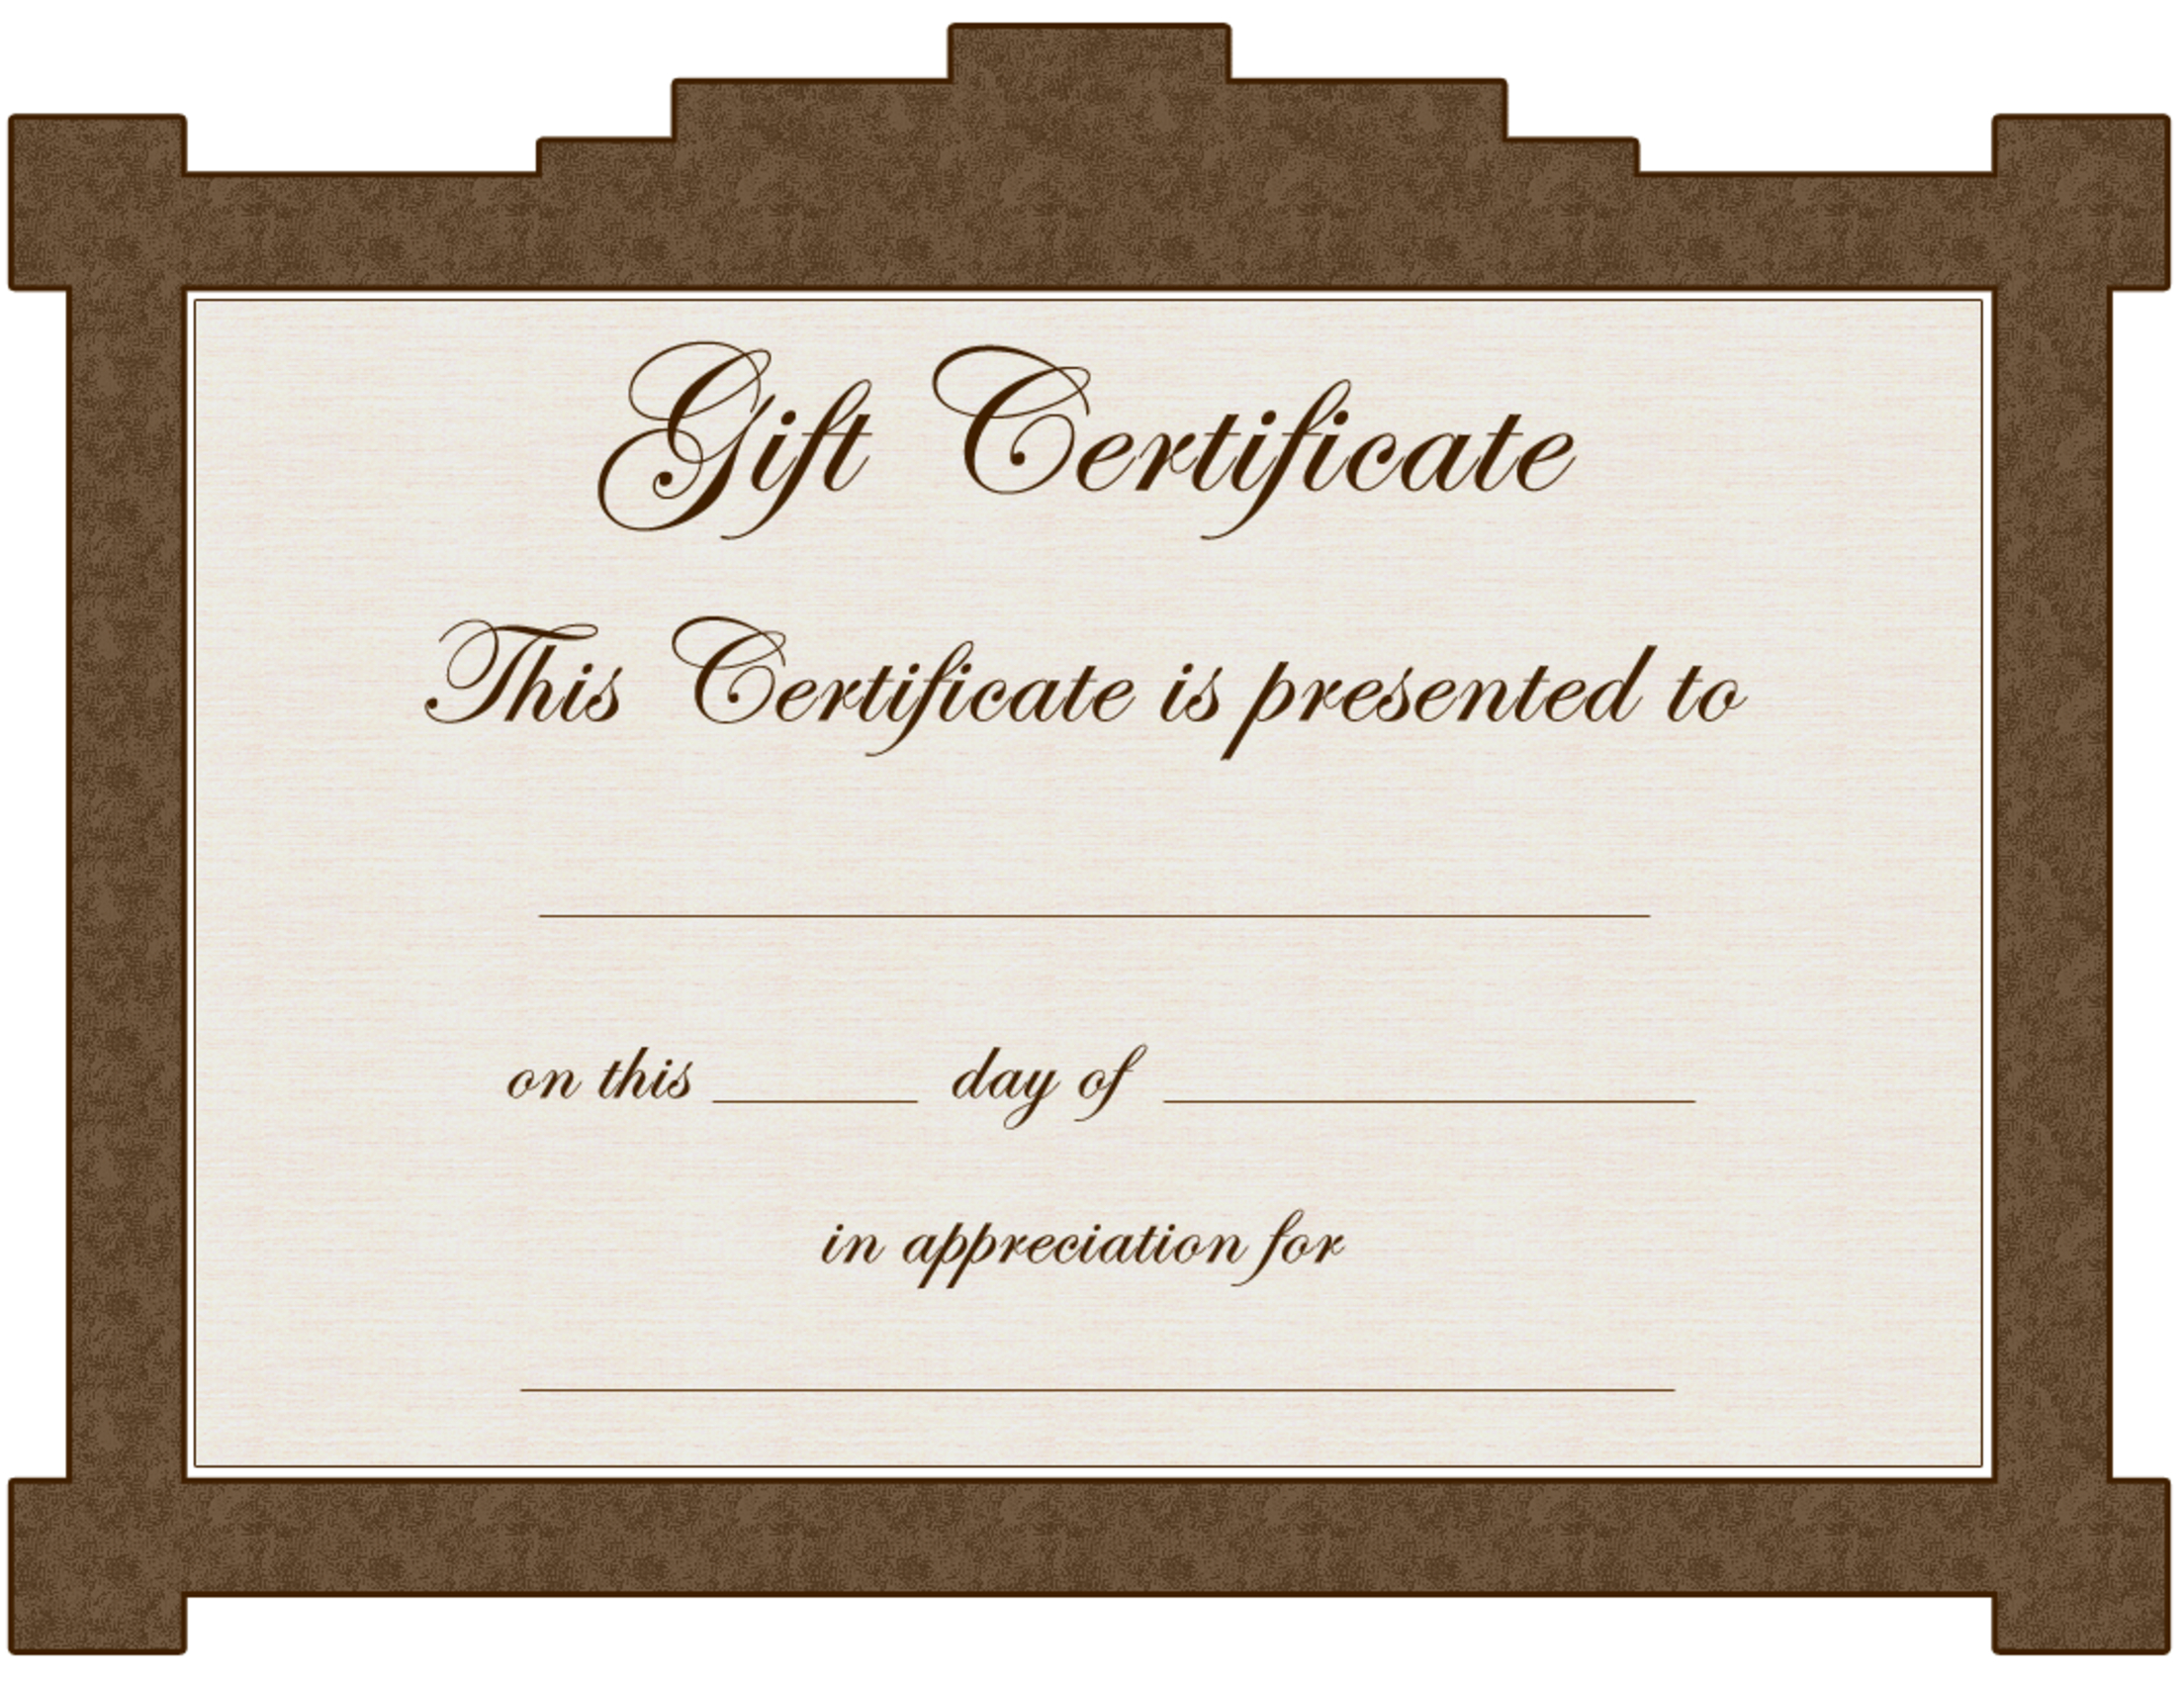 Clipart Gift Certificate Template With Graduation Gift Certificate Template Free